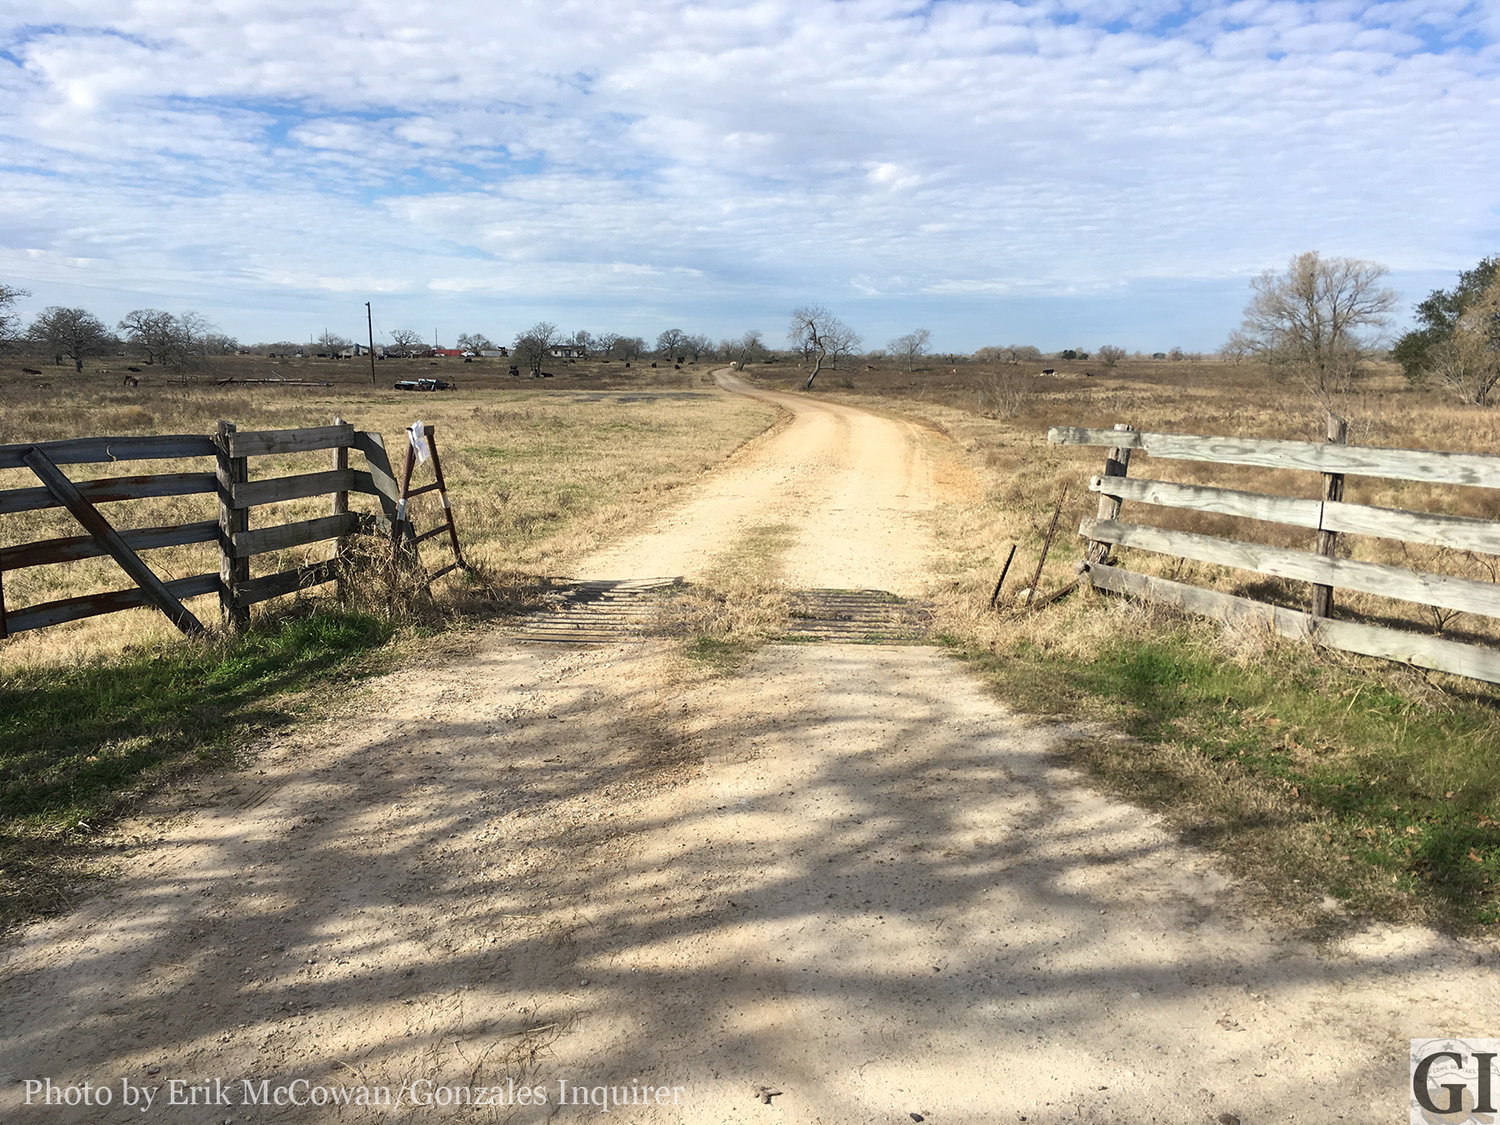 Most drivers would figure this an entrance to an area ranch, but it's actually one end of CR 229 as it connects with CR 228. The dusty lane was the source of consternation at Monday's commissioners court meeting as a petition to close a portion of it was considered.